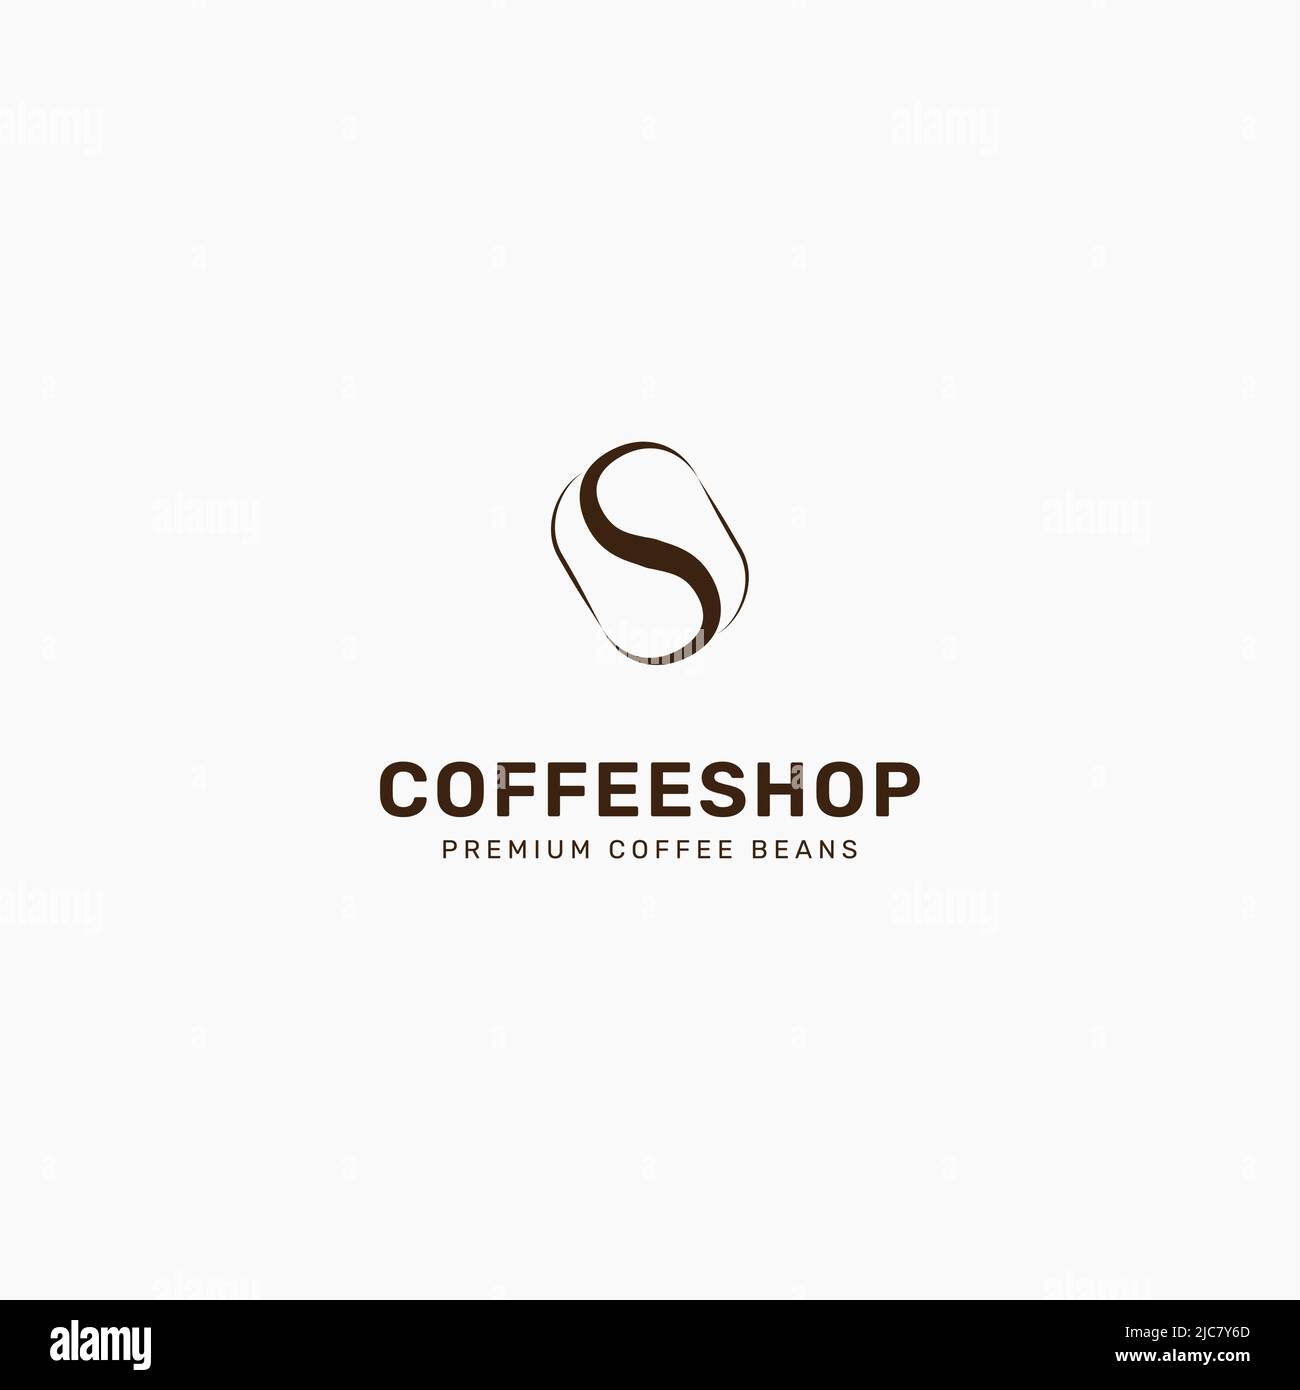 Logo initials letter S and coffee beans. Minimalist coffee logo, suitable for cafes, restaurants, packaging and coffee businesses.Vector illustration Stock Vector